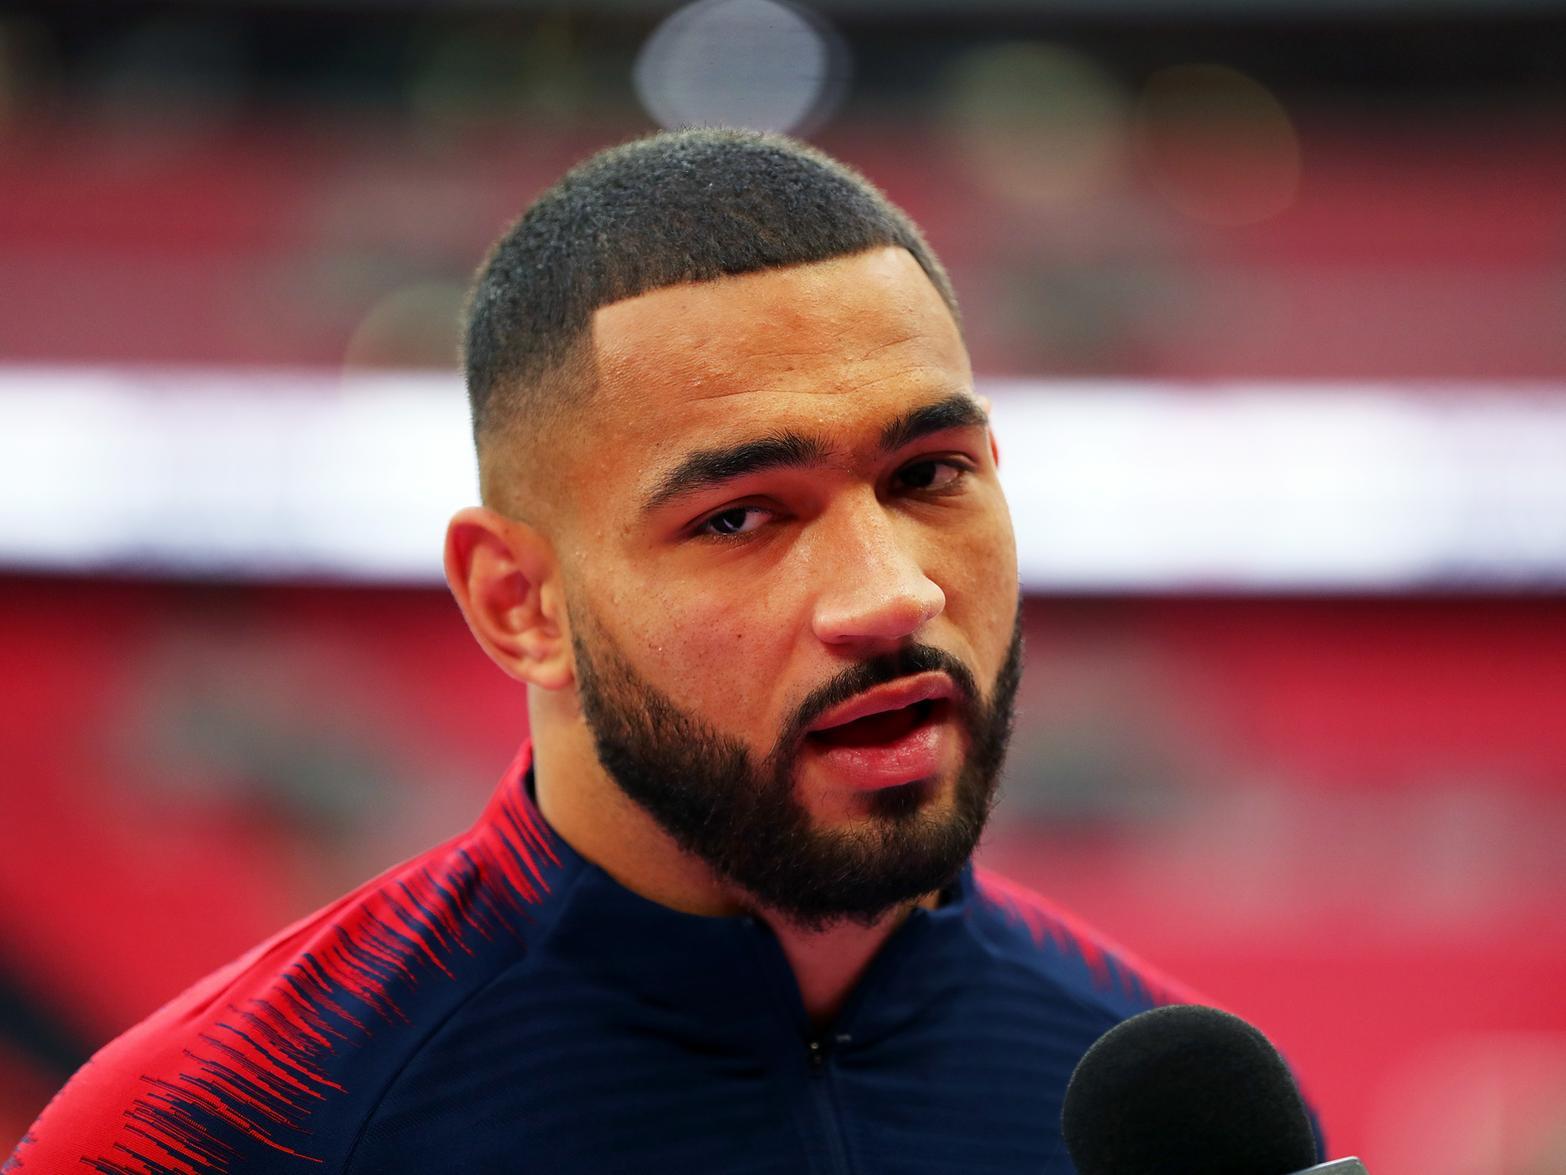 Tottenham Hotspur defender Cameron Carter-Vickers is understood to be on the radar of a host of Championship sides, with Derby County and Fulham among those looking to sign the USA international on loan. (The 72)